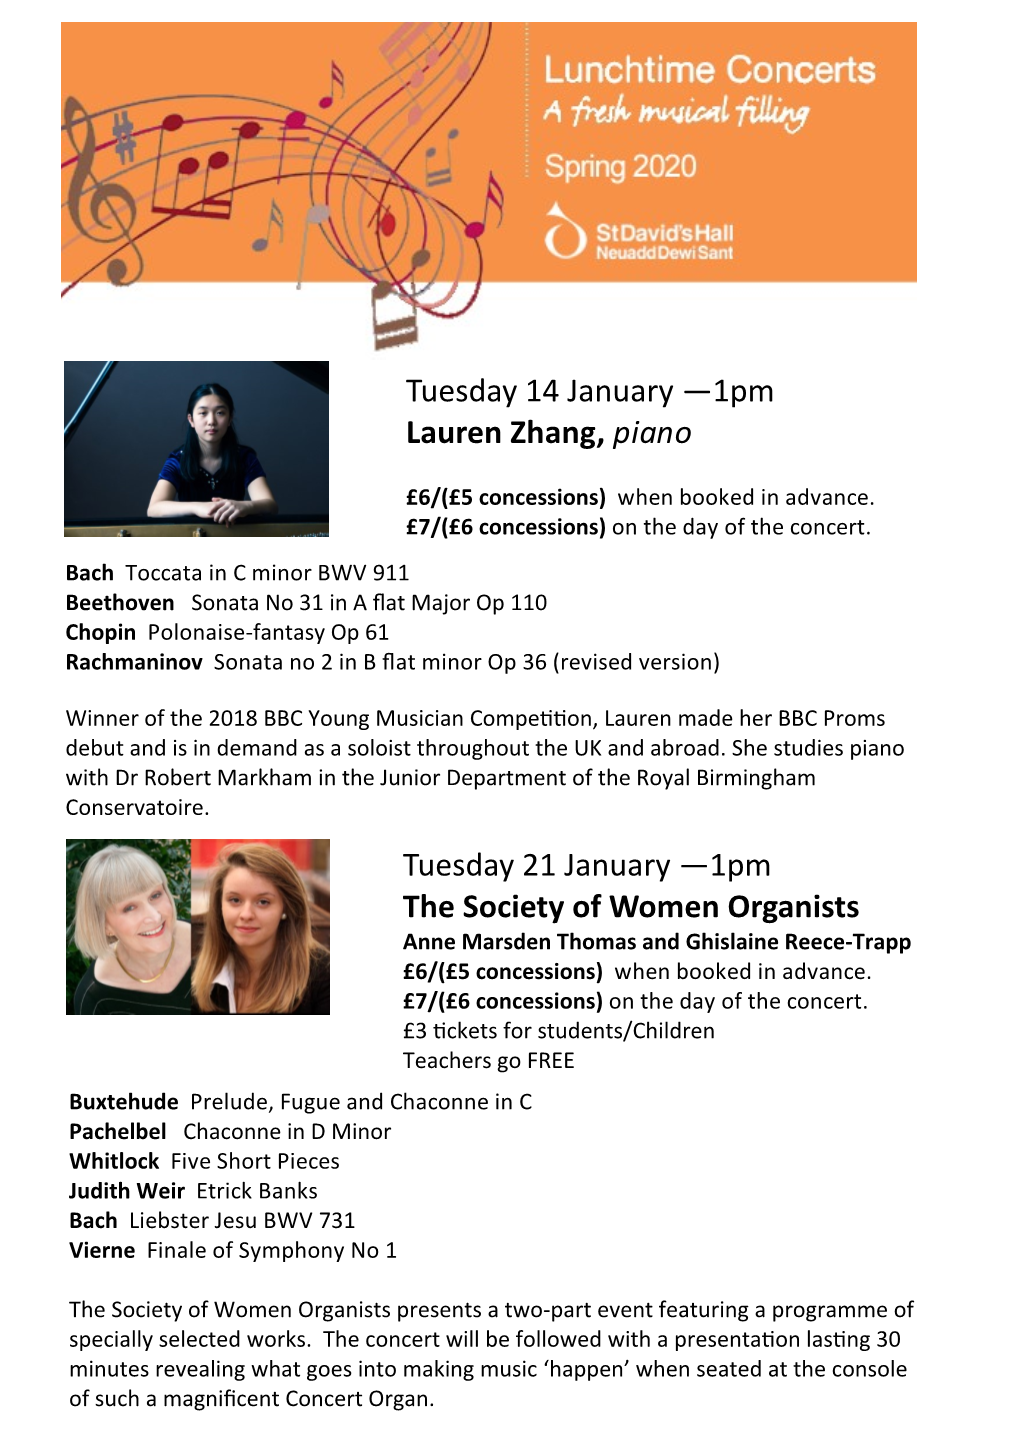 Tuesday 21 January —1Pm the Society of Women Organists Anne Marsden Thomas and Ghislaine Reece-Trapp £6/(£5 Concessions) When Booked in Advance